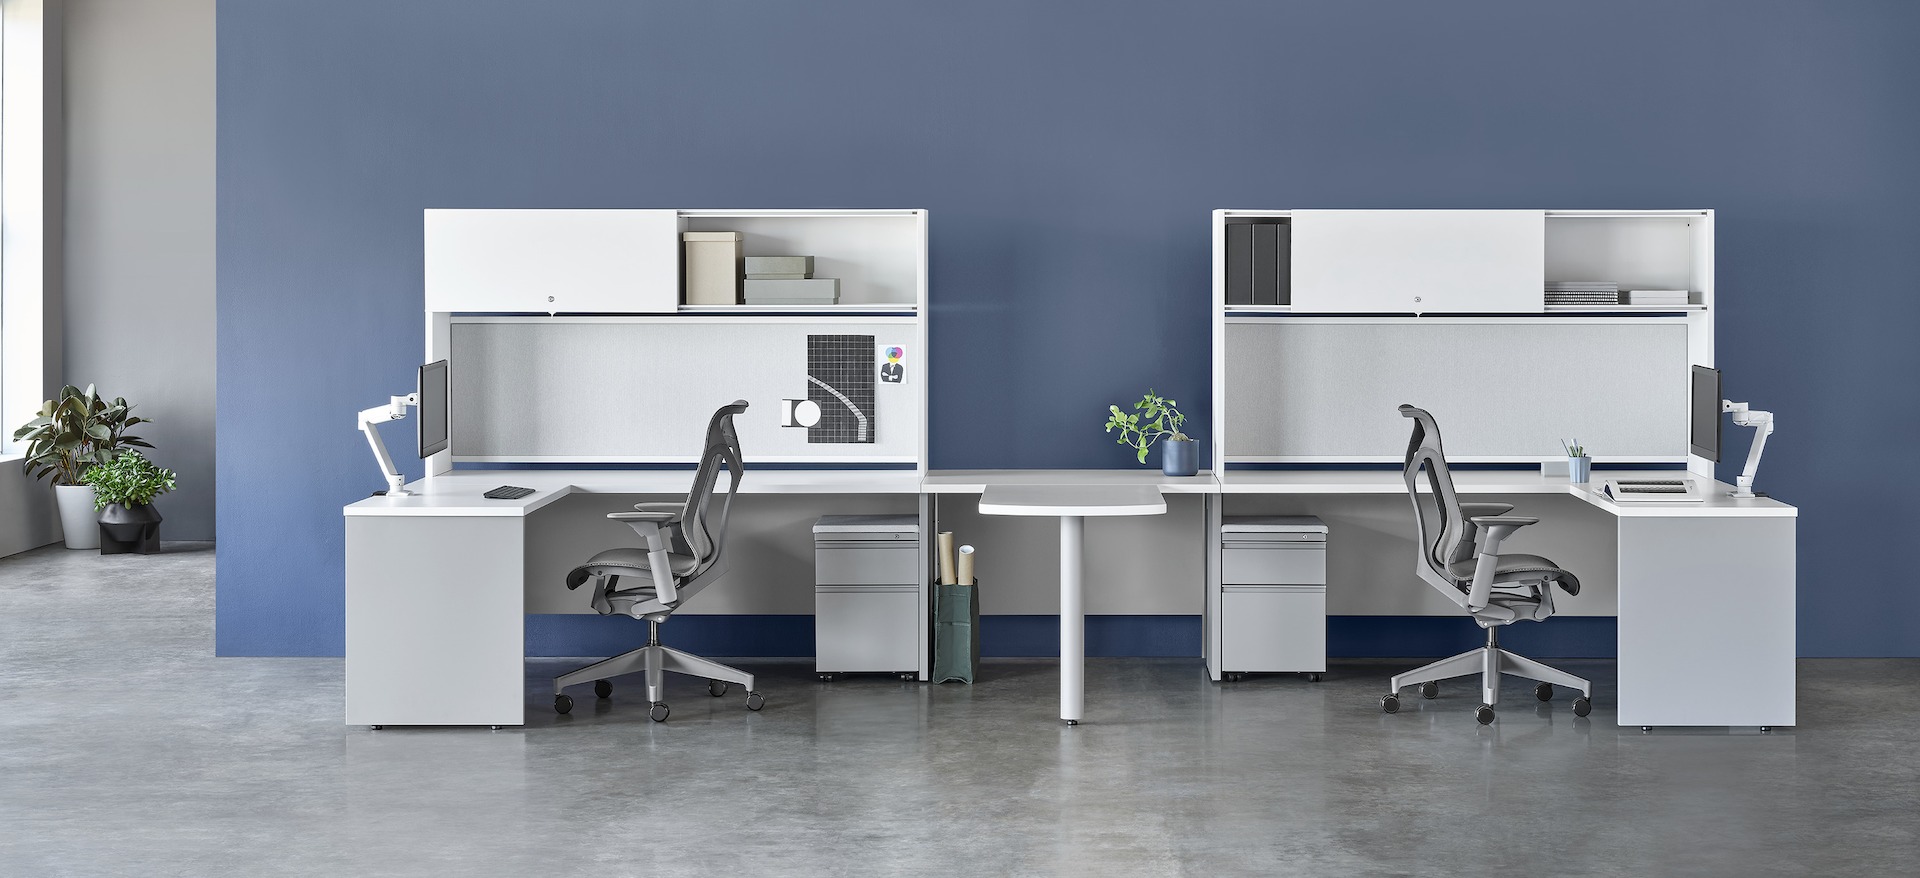 White and gray Canvas Metal Desks with overhead storage, peninsula surface, and gray Cosm Chairs.